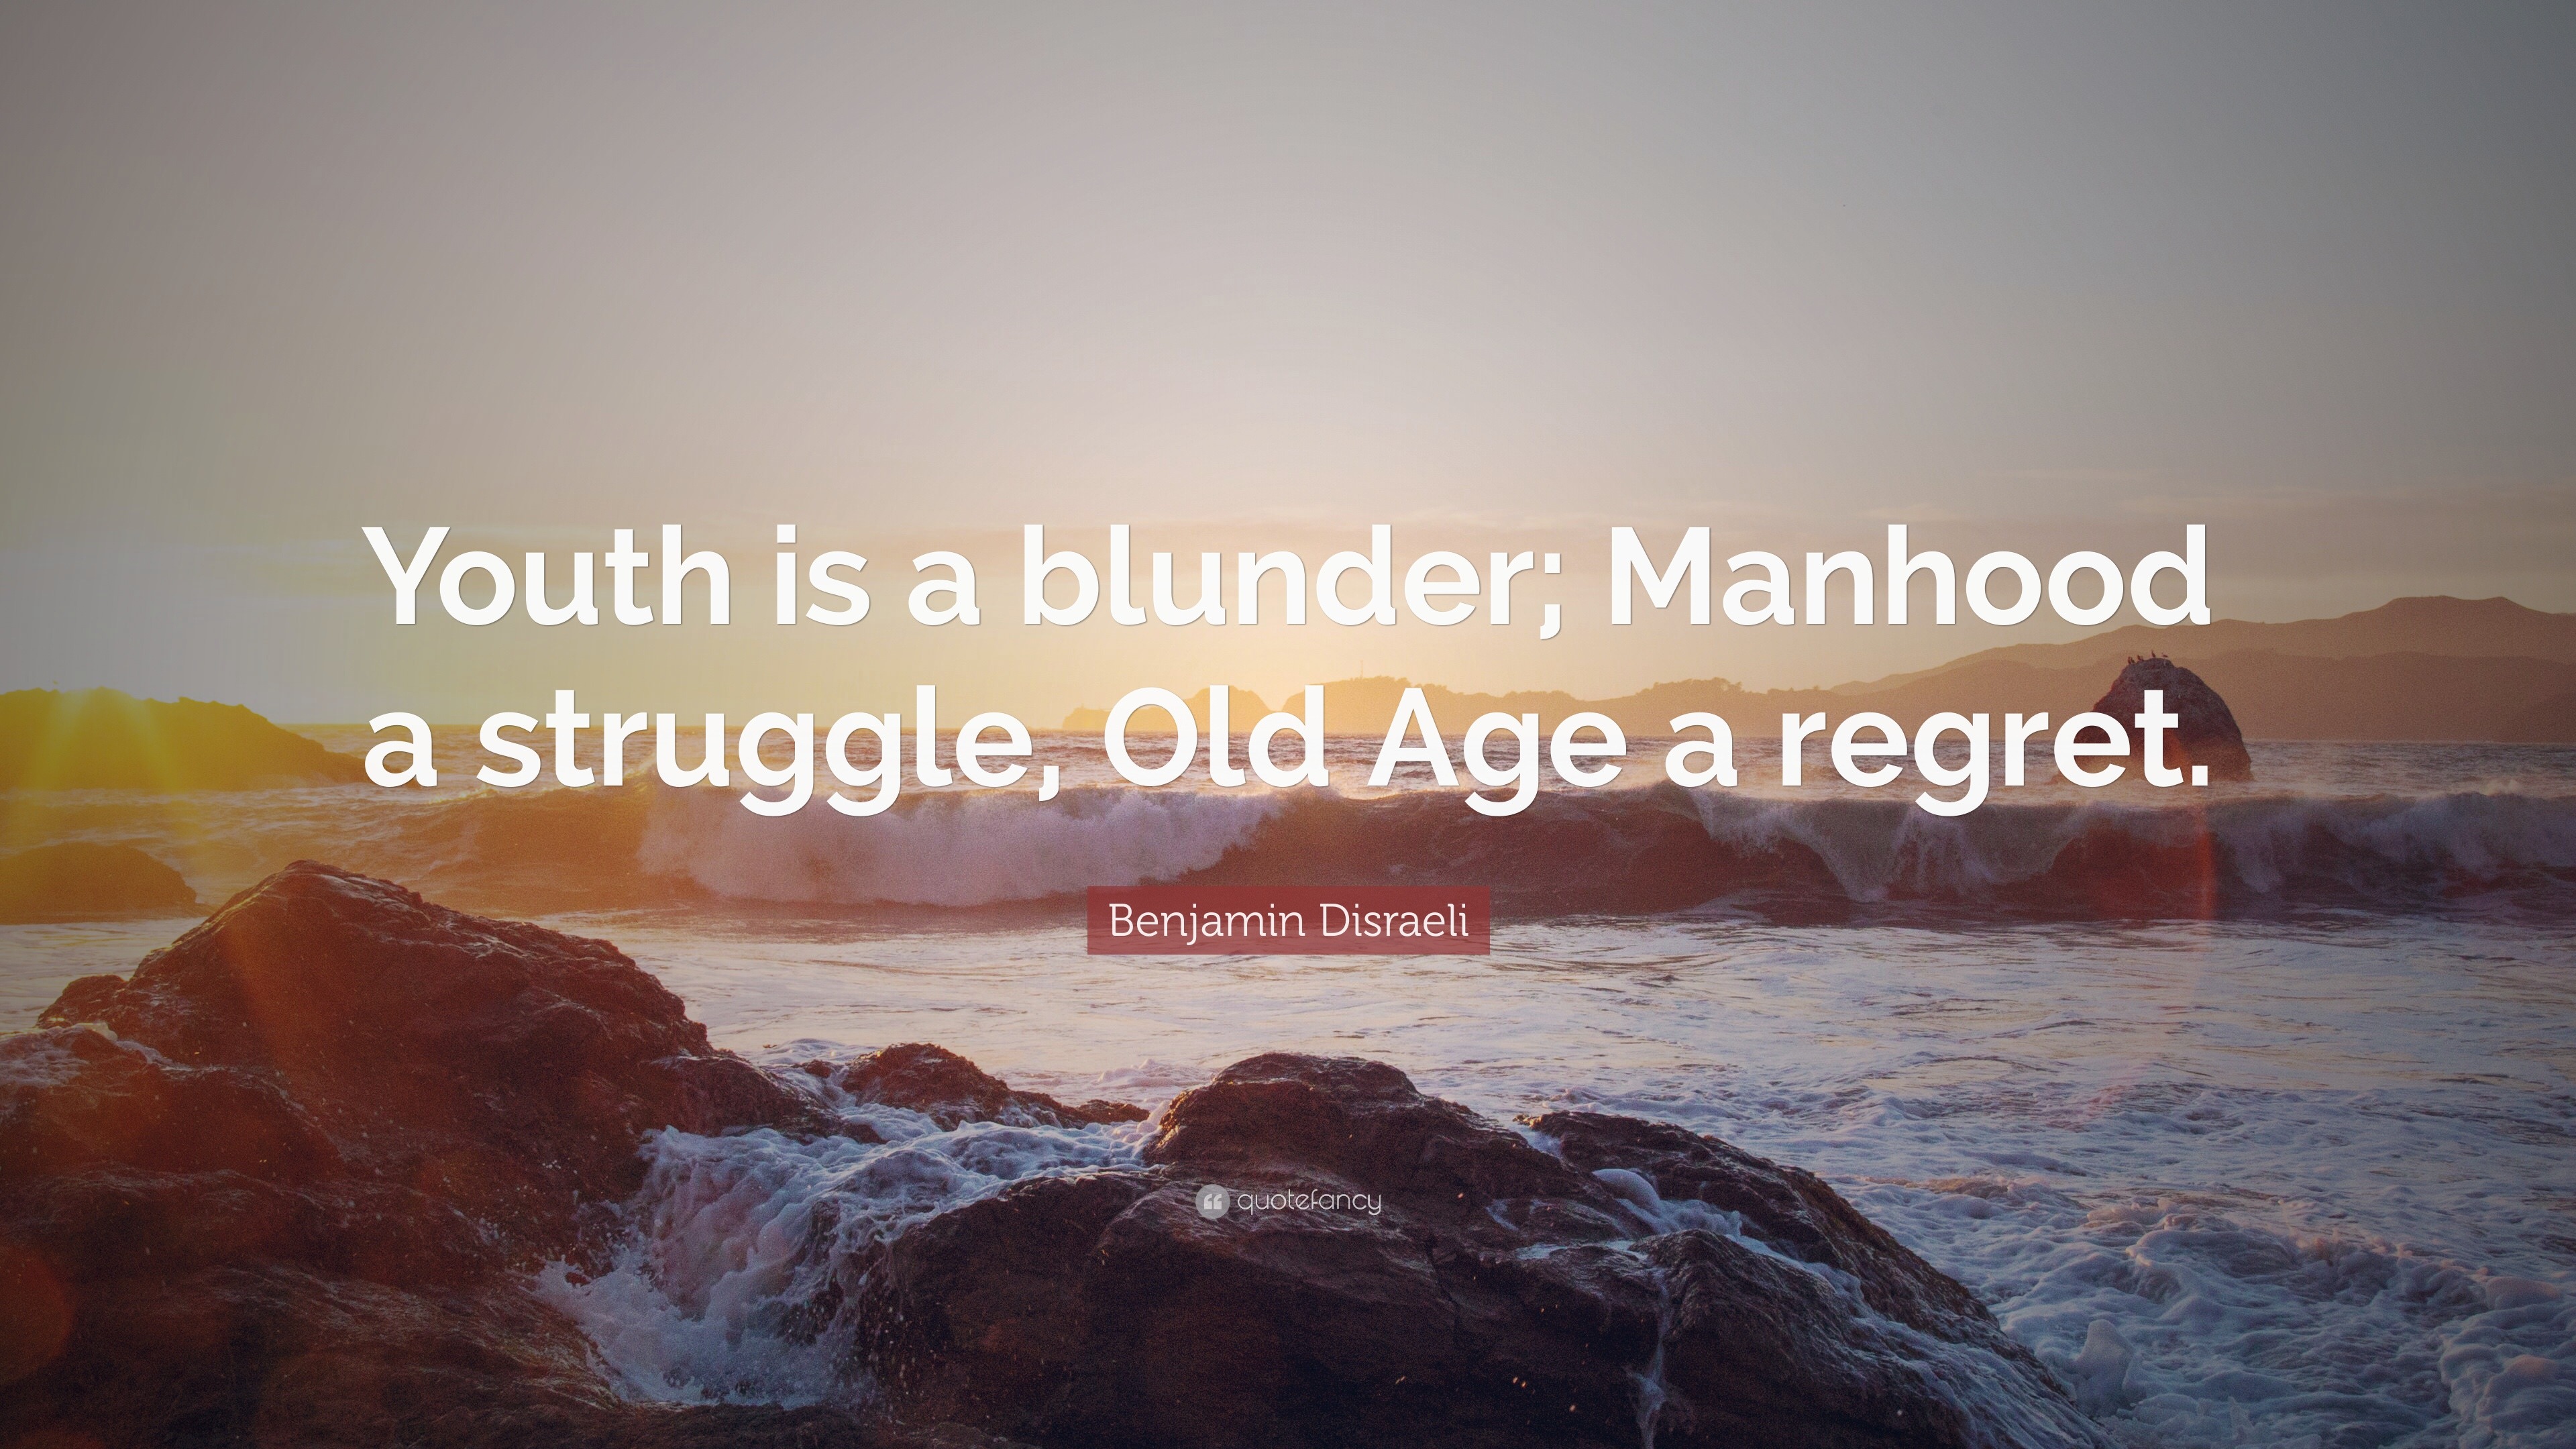 Youth is a blunder, manhood a struggle, and old age a regret.” Do